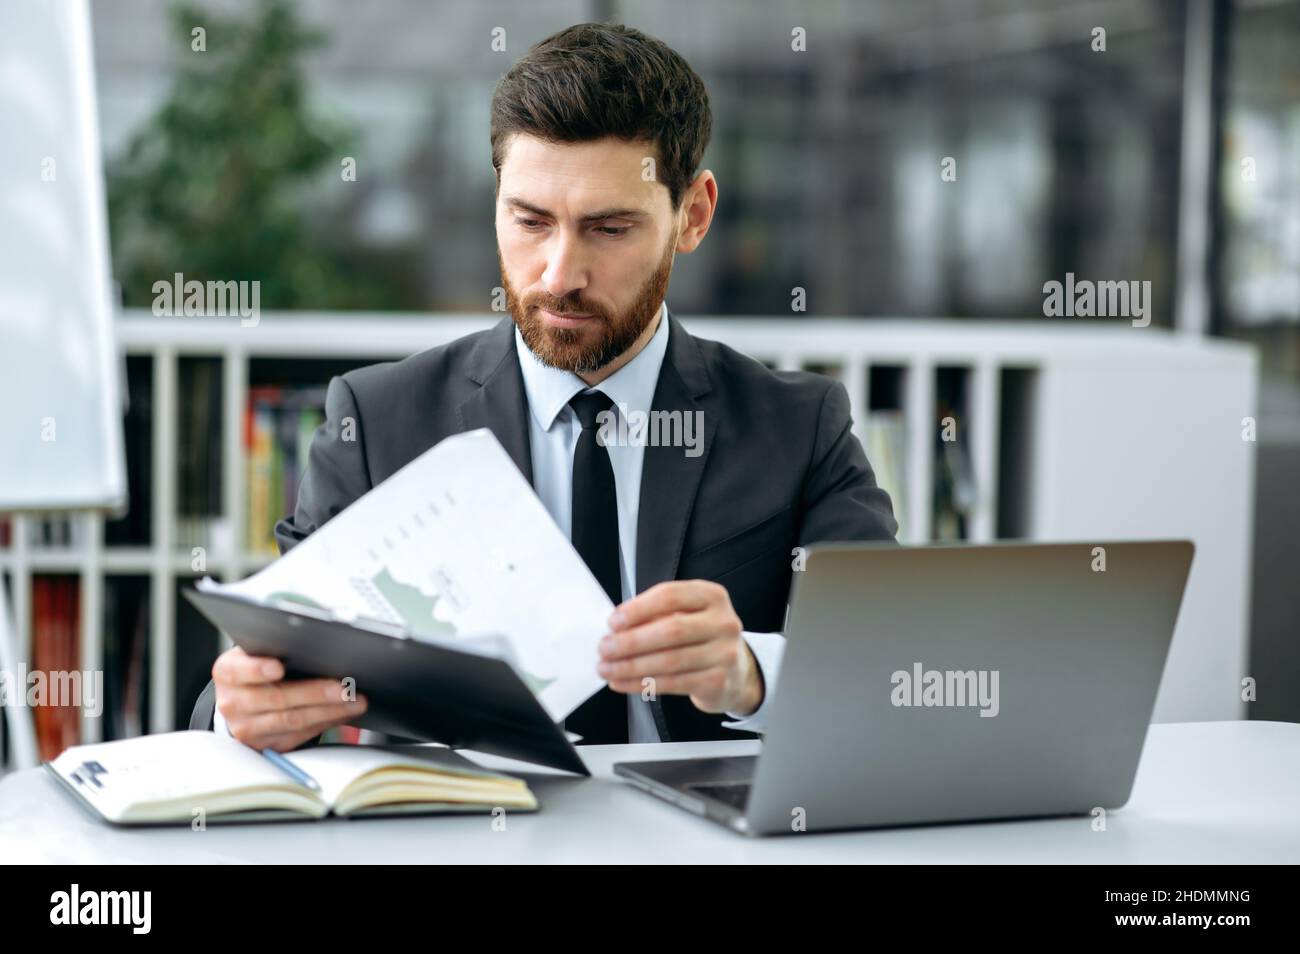 Smart confident caucasian bearded businessperson, ceo of company, top manager, financial expert, sits in modern office, concentrated studies financial documents, plans a development business strategy Stock Photo